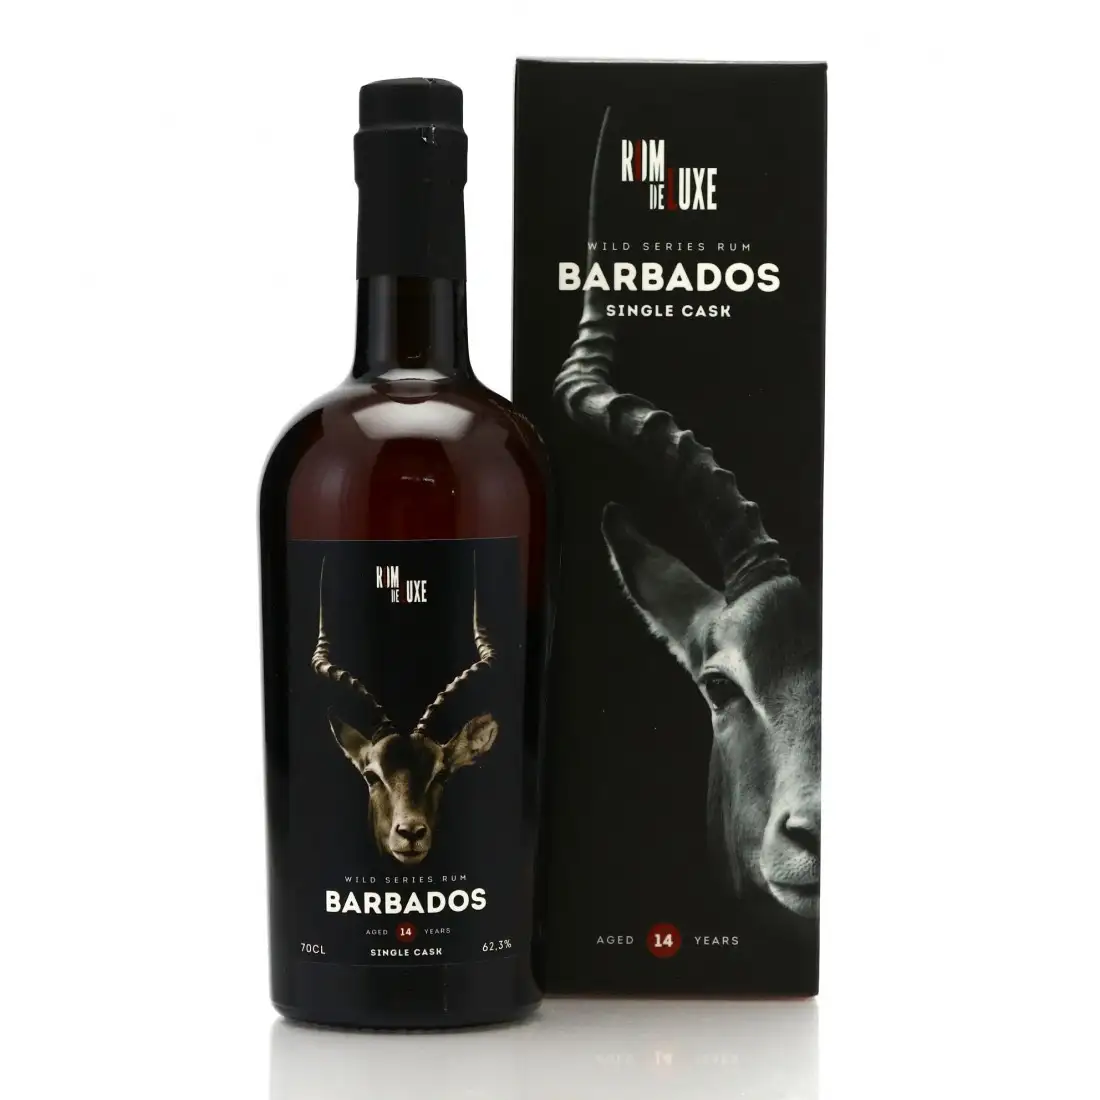 Image of the front of the bottle of the rum Wild Series Rum Barbados No. 25 (Batch 1)